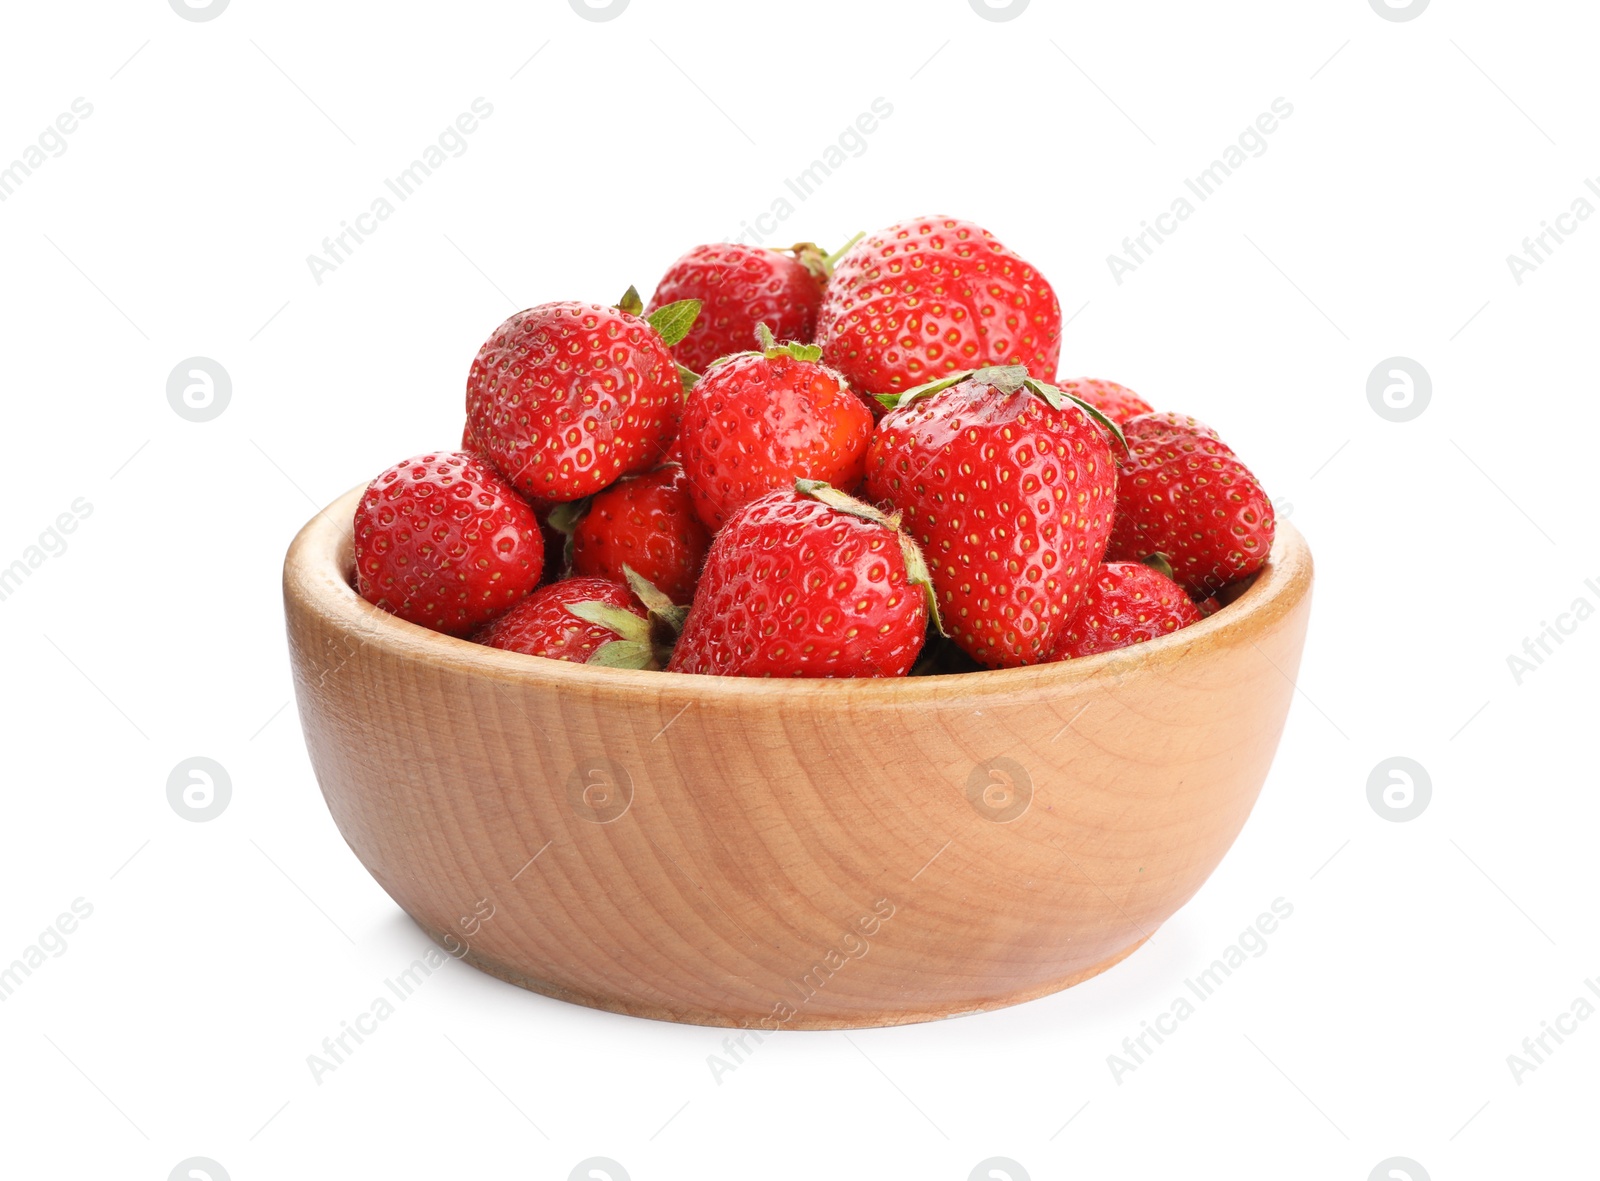 Photo of Ripe strawberries in bowl isolated on white